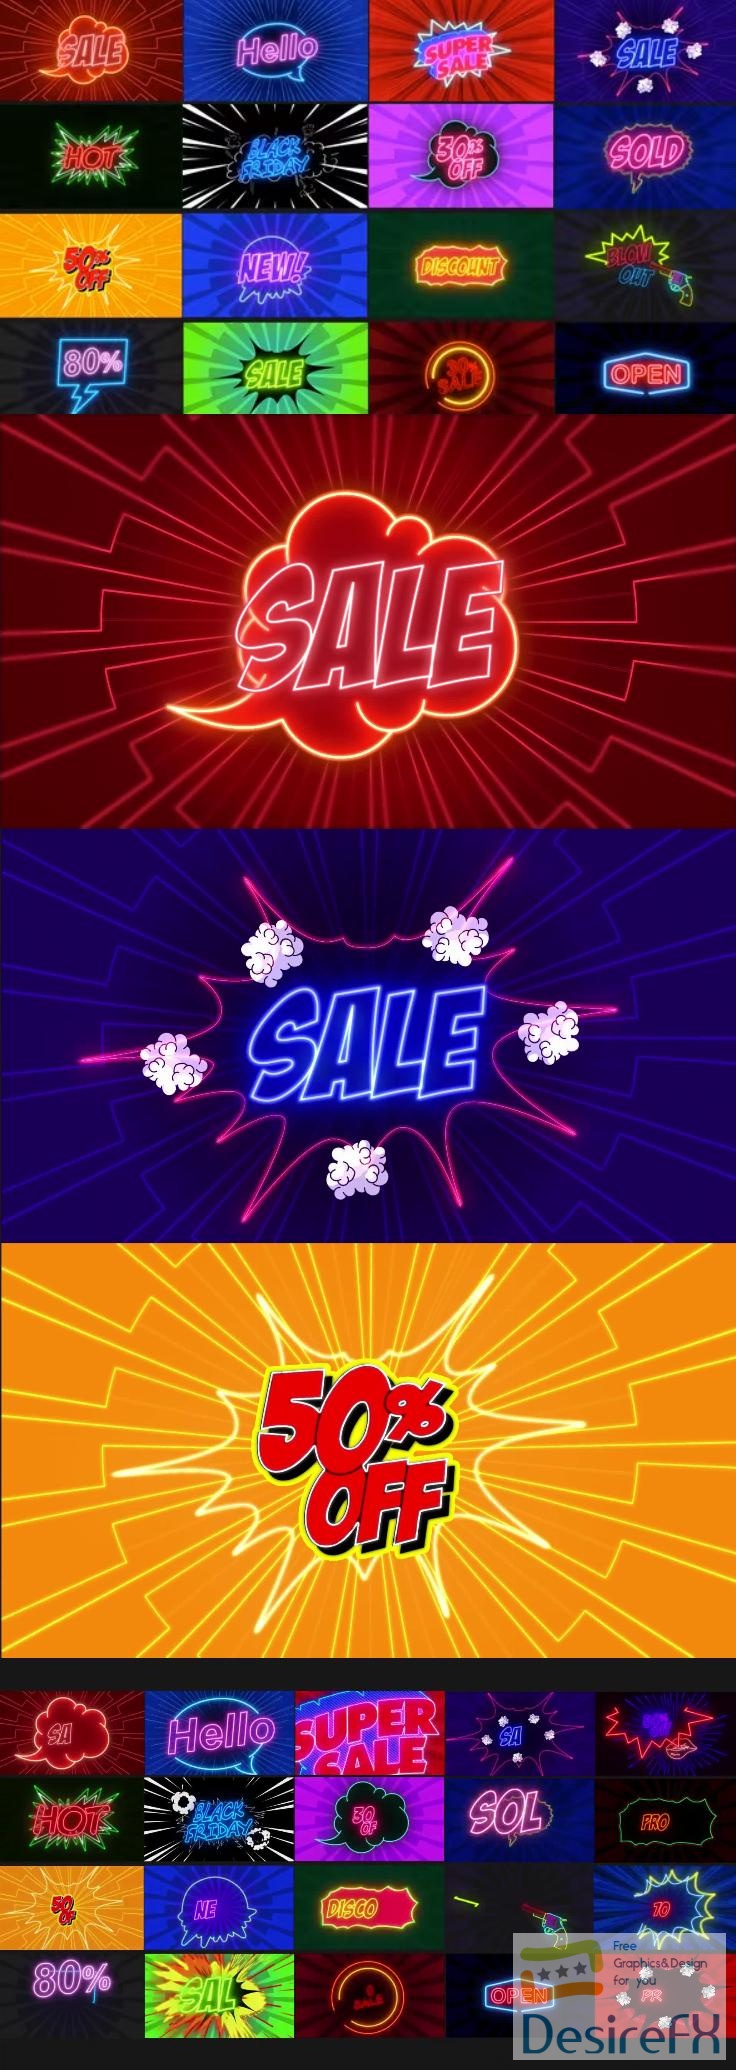 Videohive - Comic Text Fx 5_Neon Sale Pack - 37391439